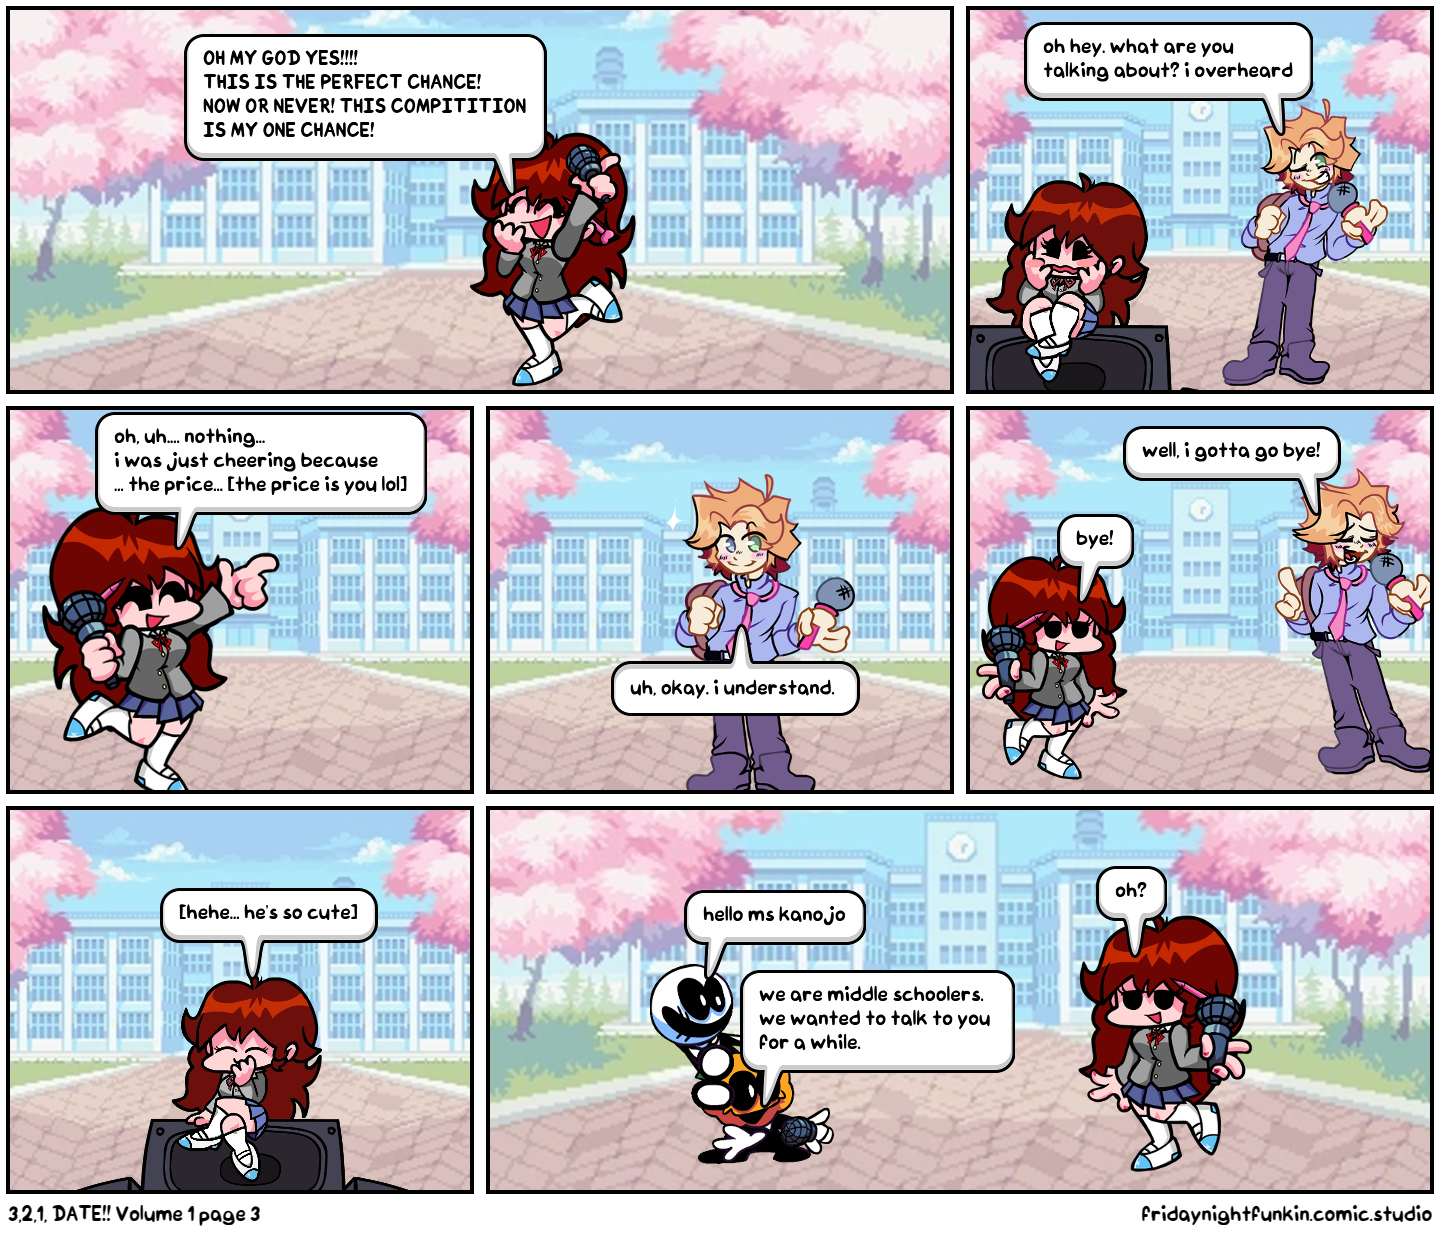 3,2,1, DATE!! Volume 1 page 3